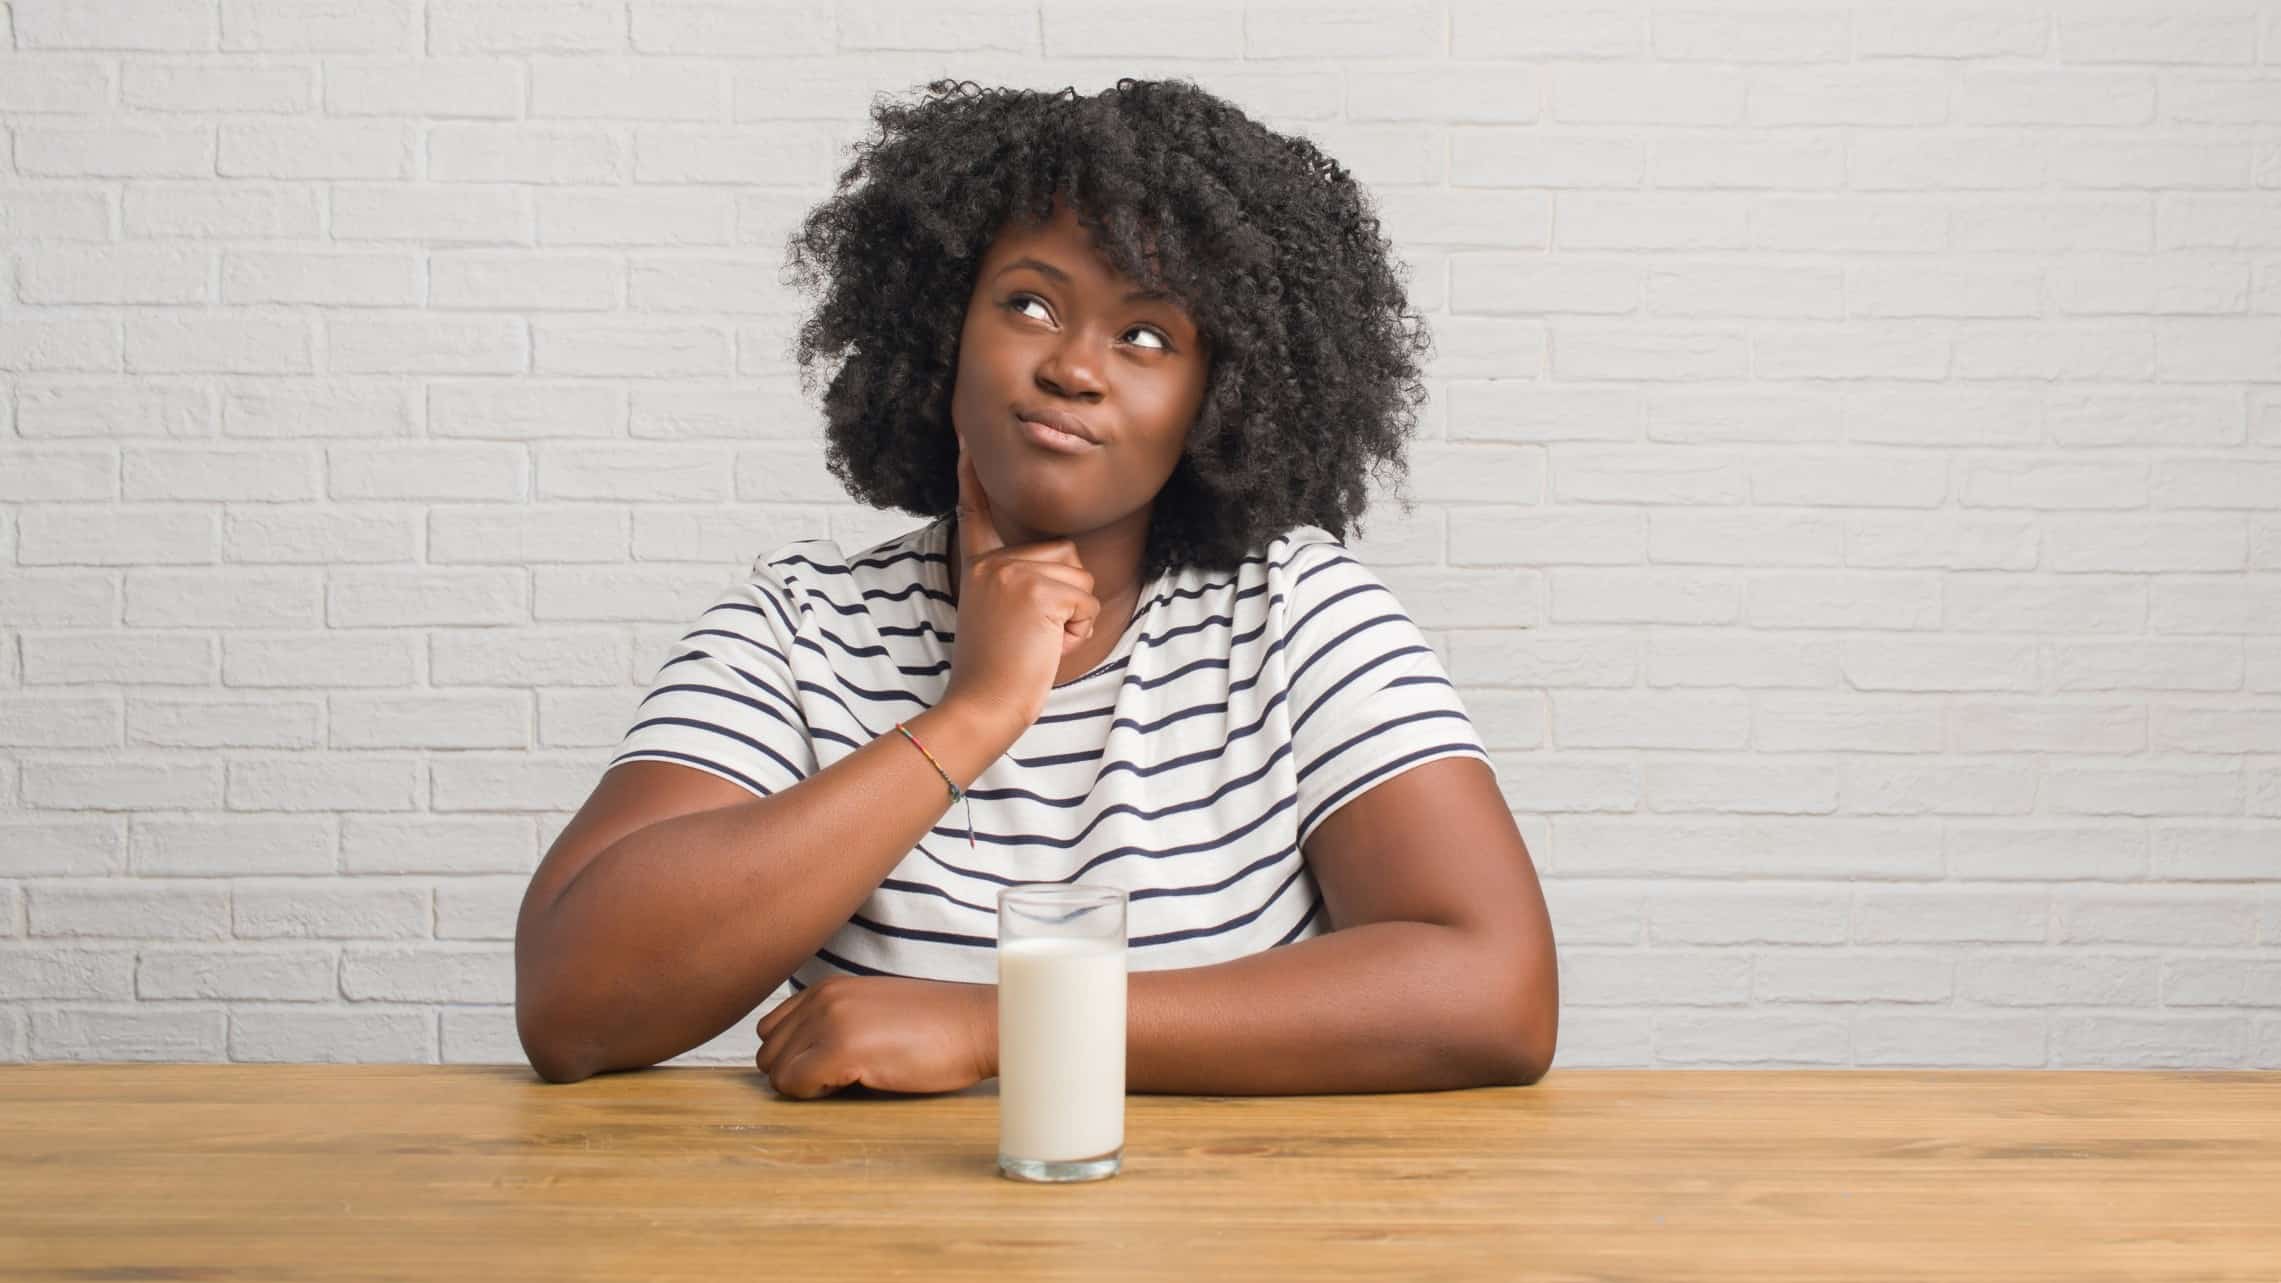 a woman sits with a glass of milk in front of her as she puts a finger to the side of her face as though in thought while her eyes look to the side as though she is contemplating something.